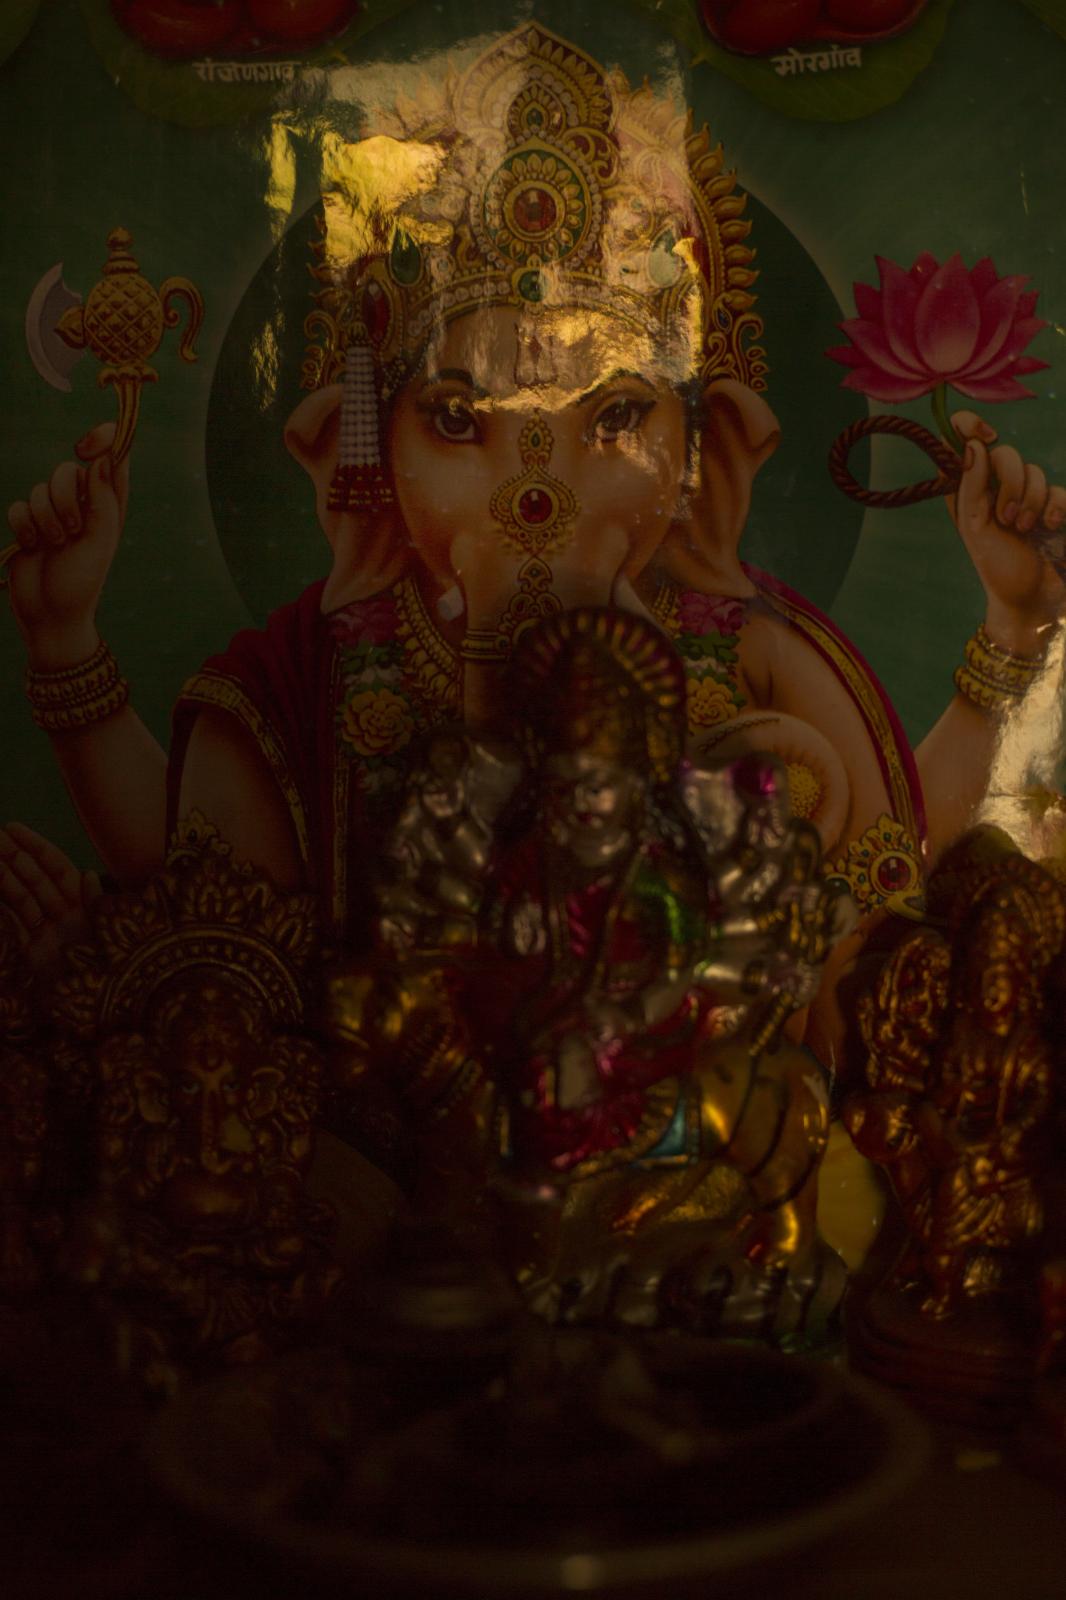 The Revived - The image of Ganesha - one of the most important gods of...